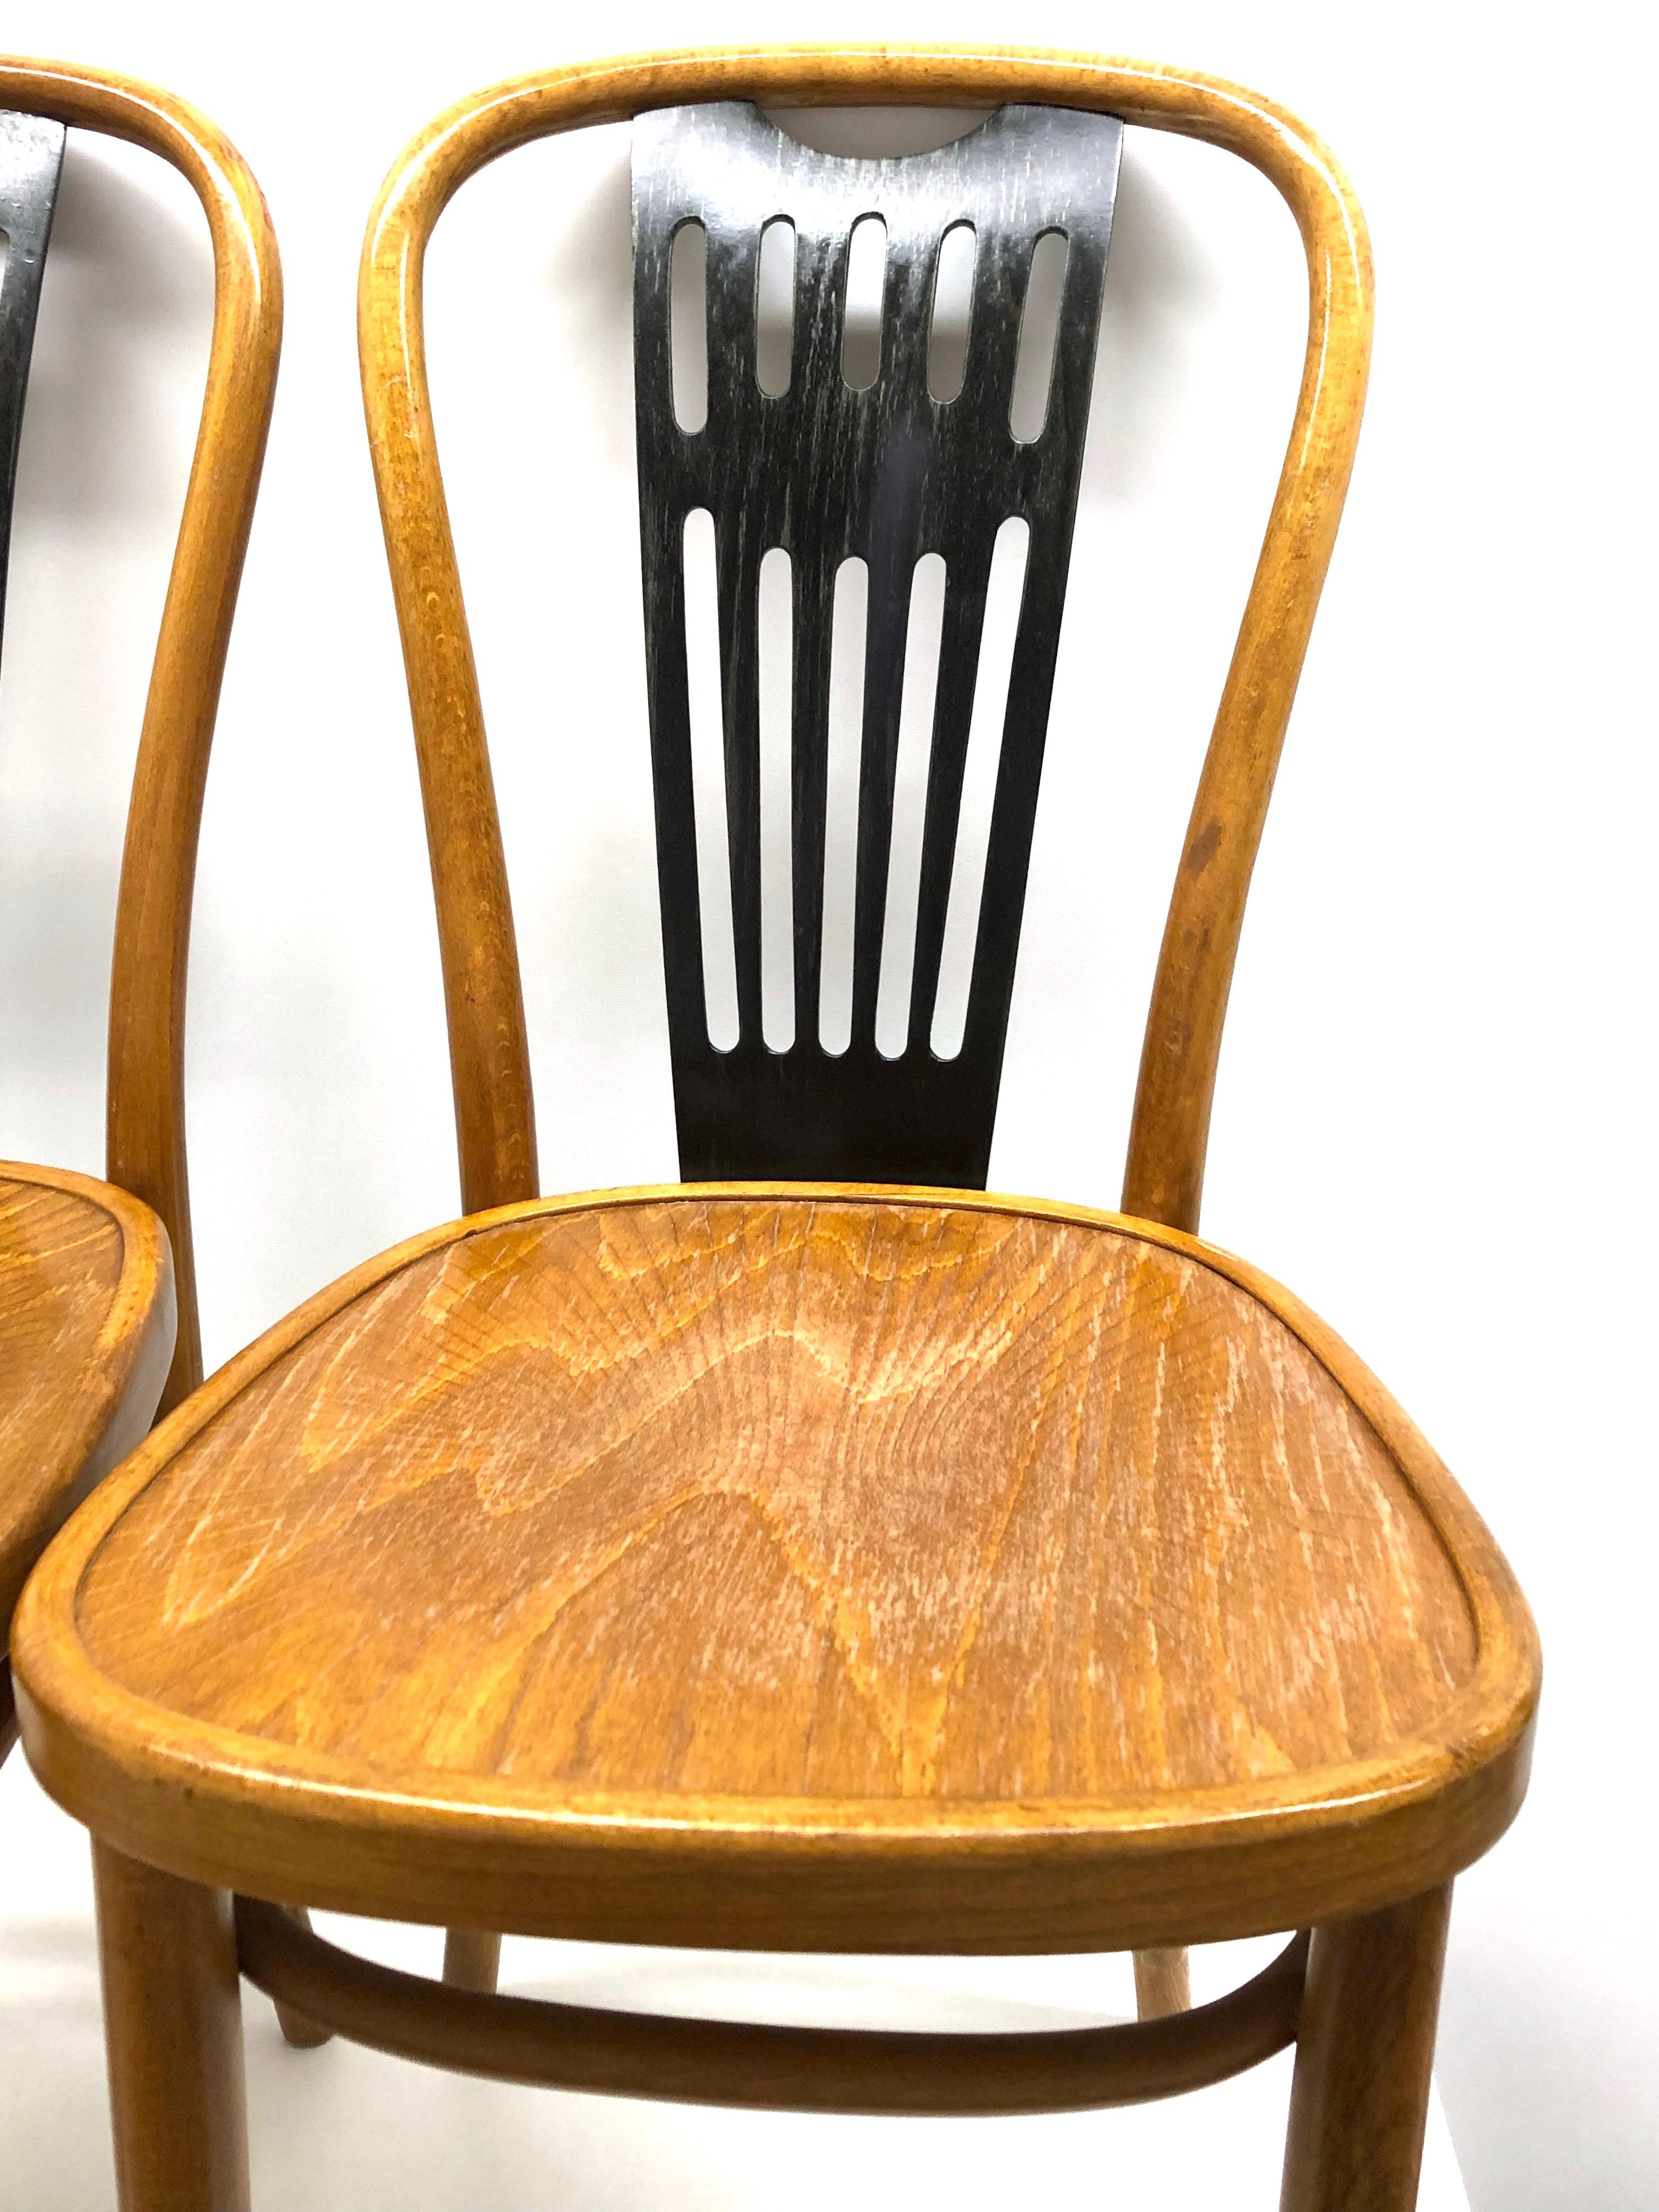 Polish Pair of Bentwood Chairs made by ZPM Radomsko, Poland for Mobilair, Germany